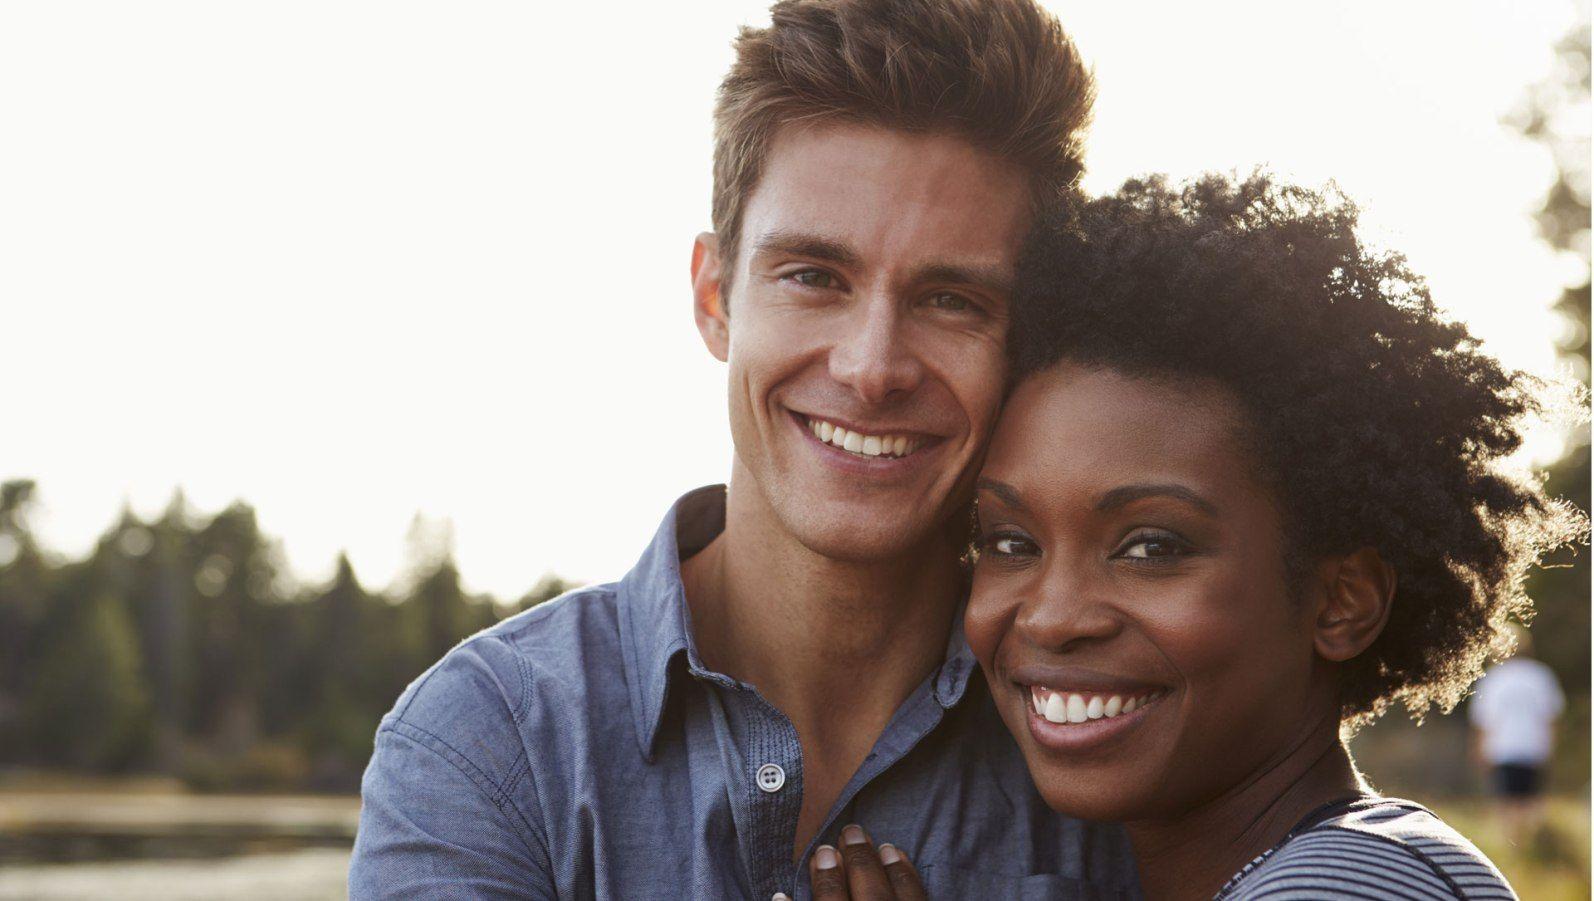 Signs of interracial cheating